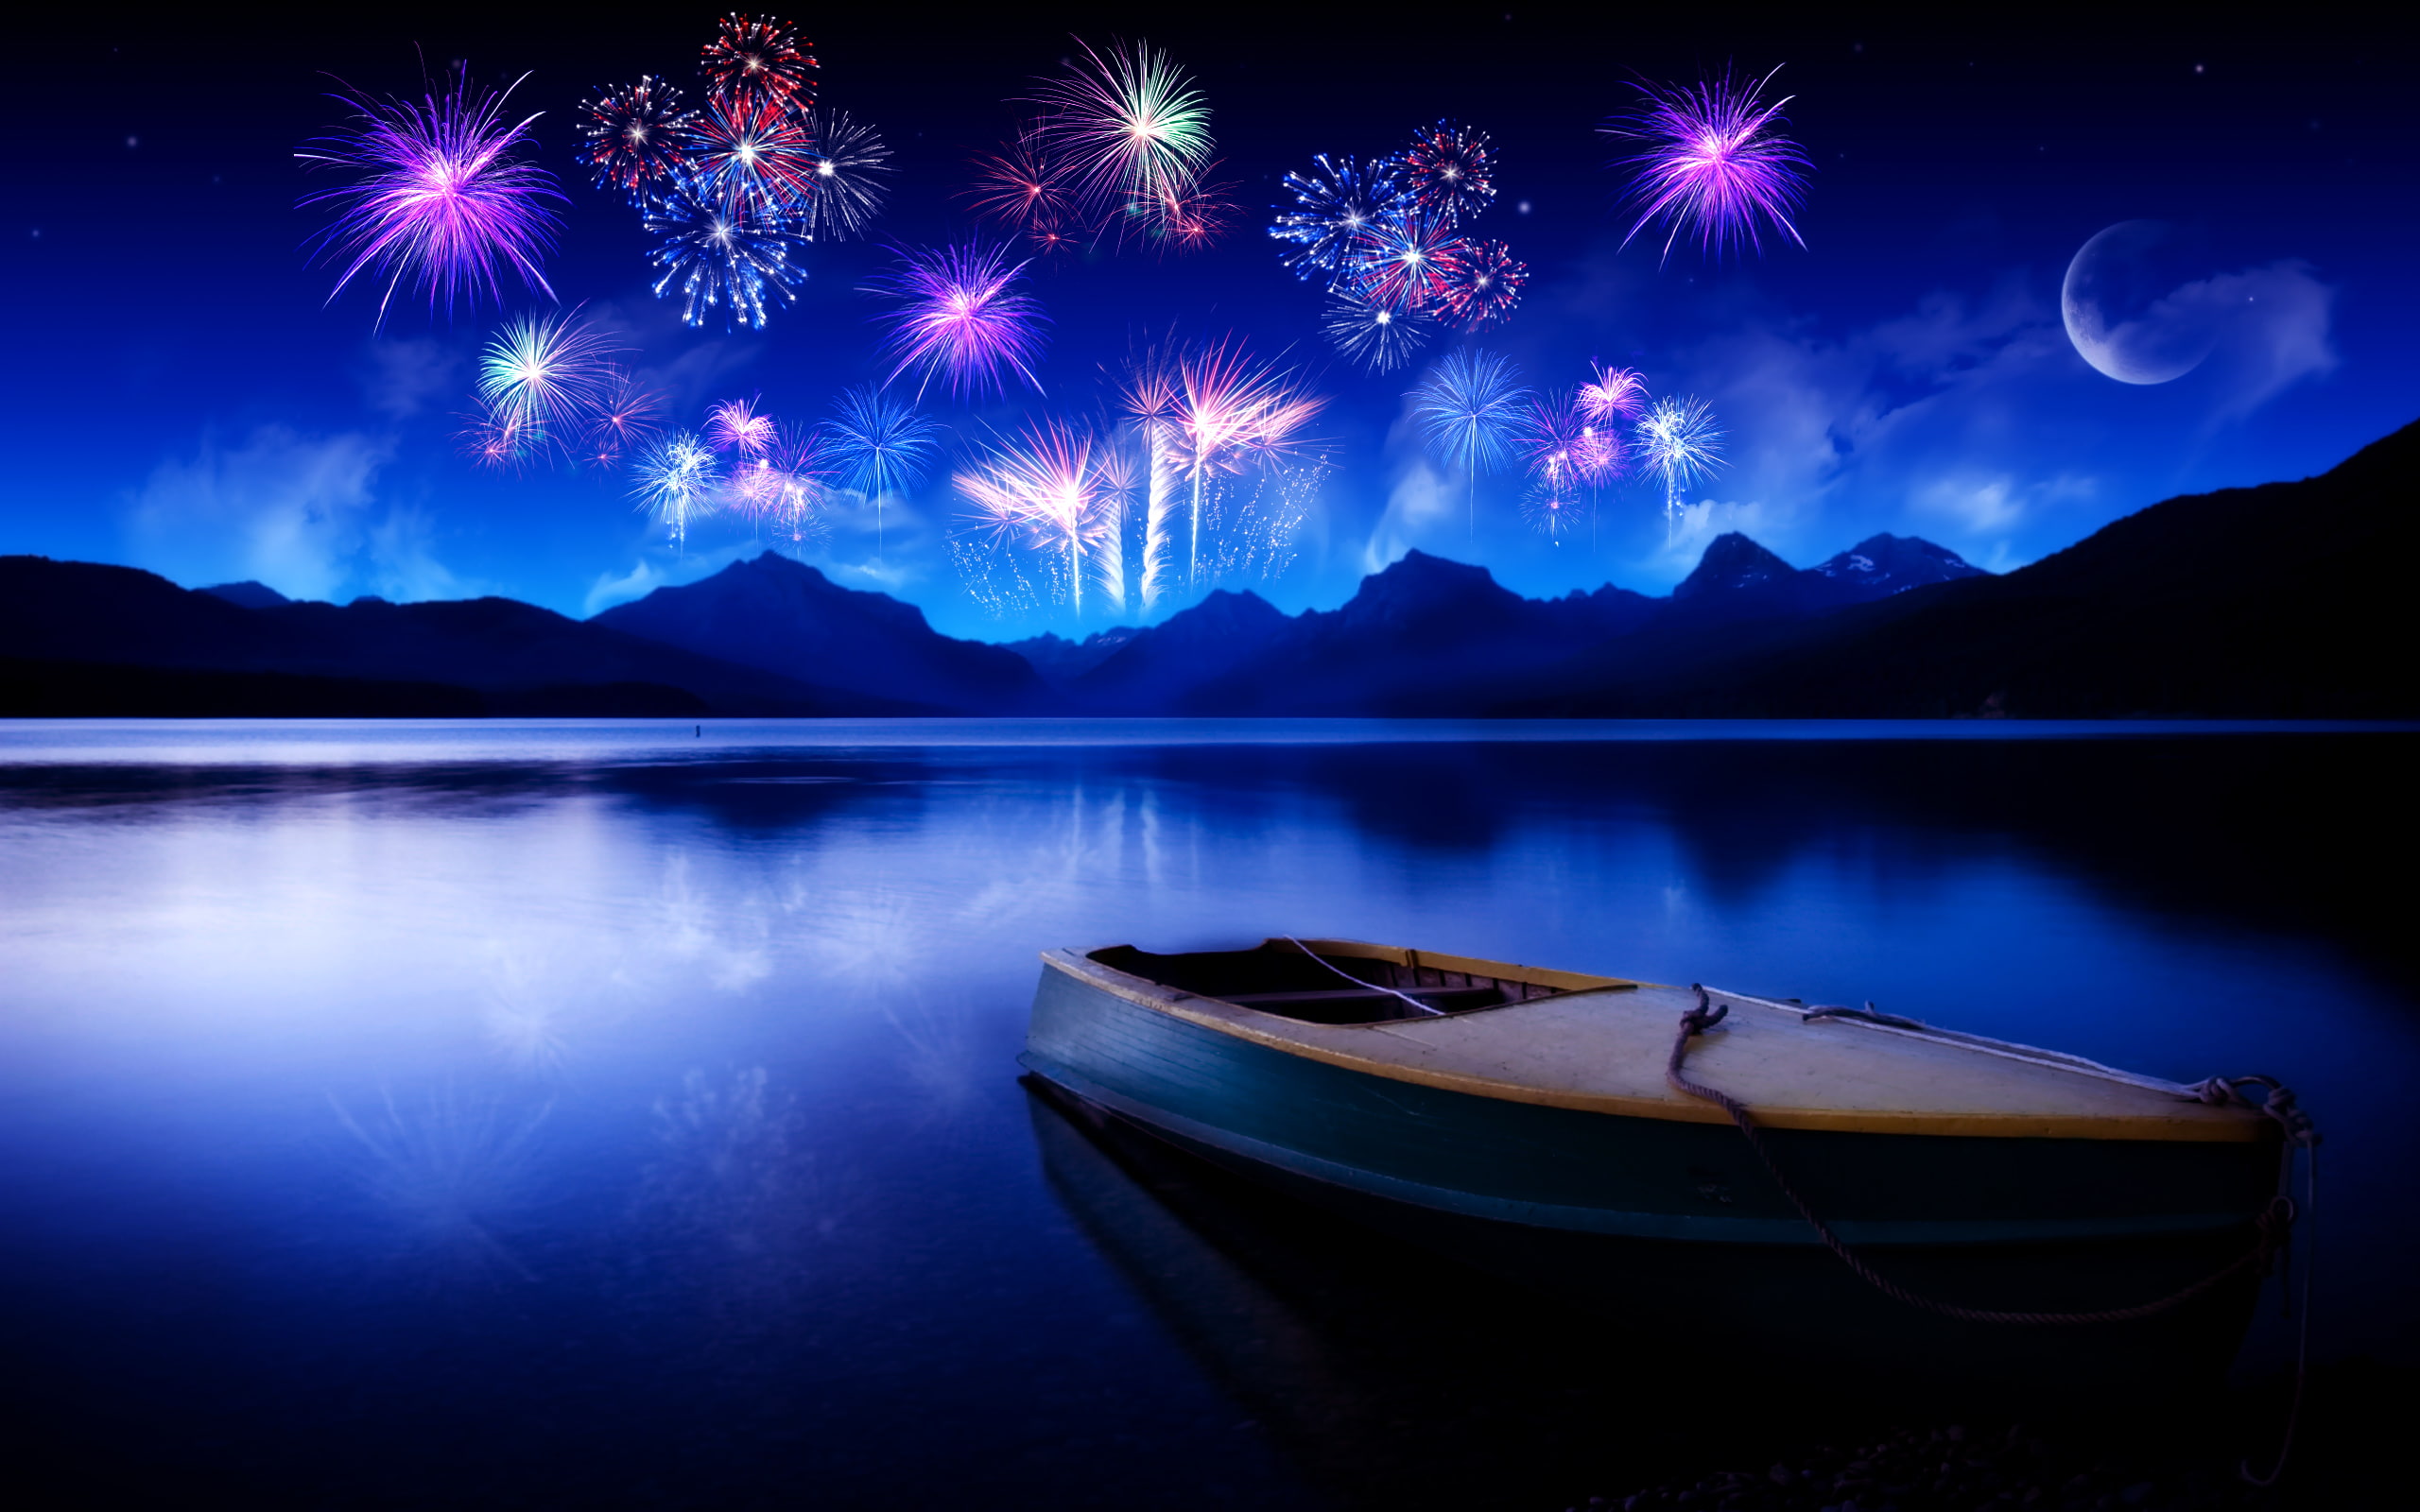 HD Wallpaper Celebrating New Year Creative And Graphics